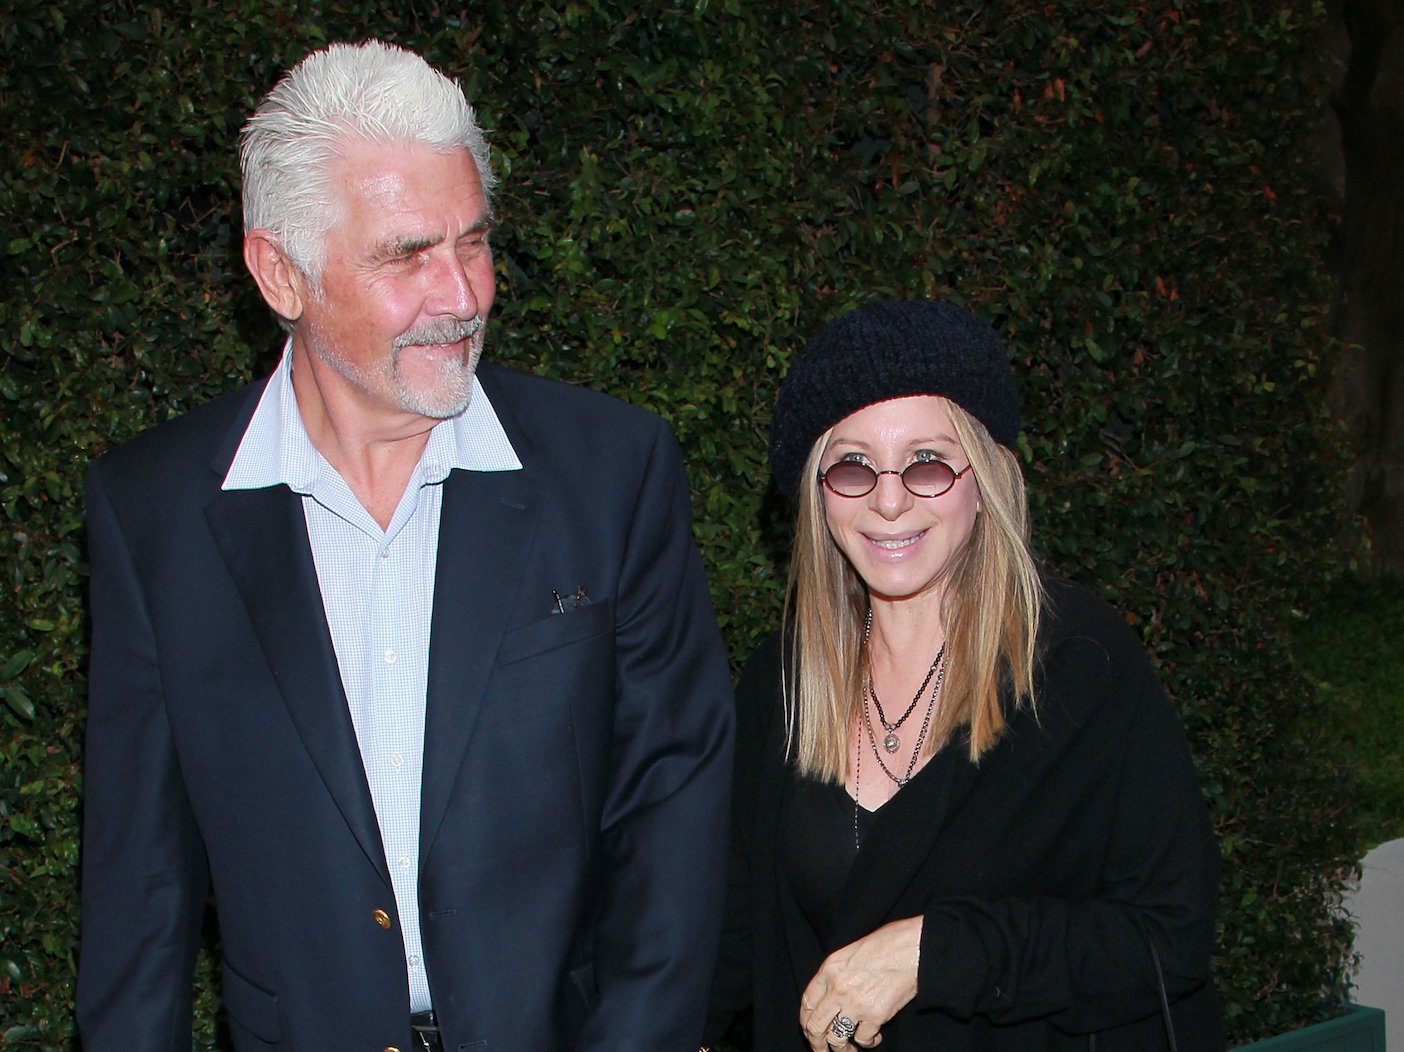 Barbra Streisand Allegedly Fighting With James Brolin, Supposedly Ruined 80th Birthday With Arguments, Dubious Rumors Say